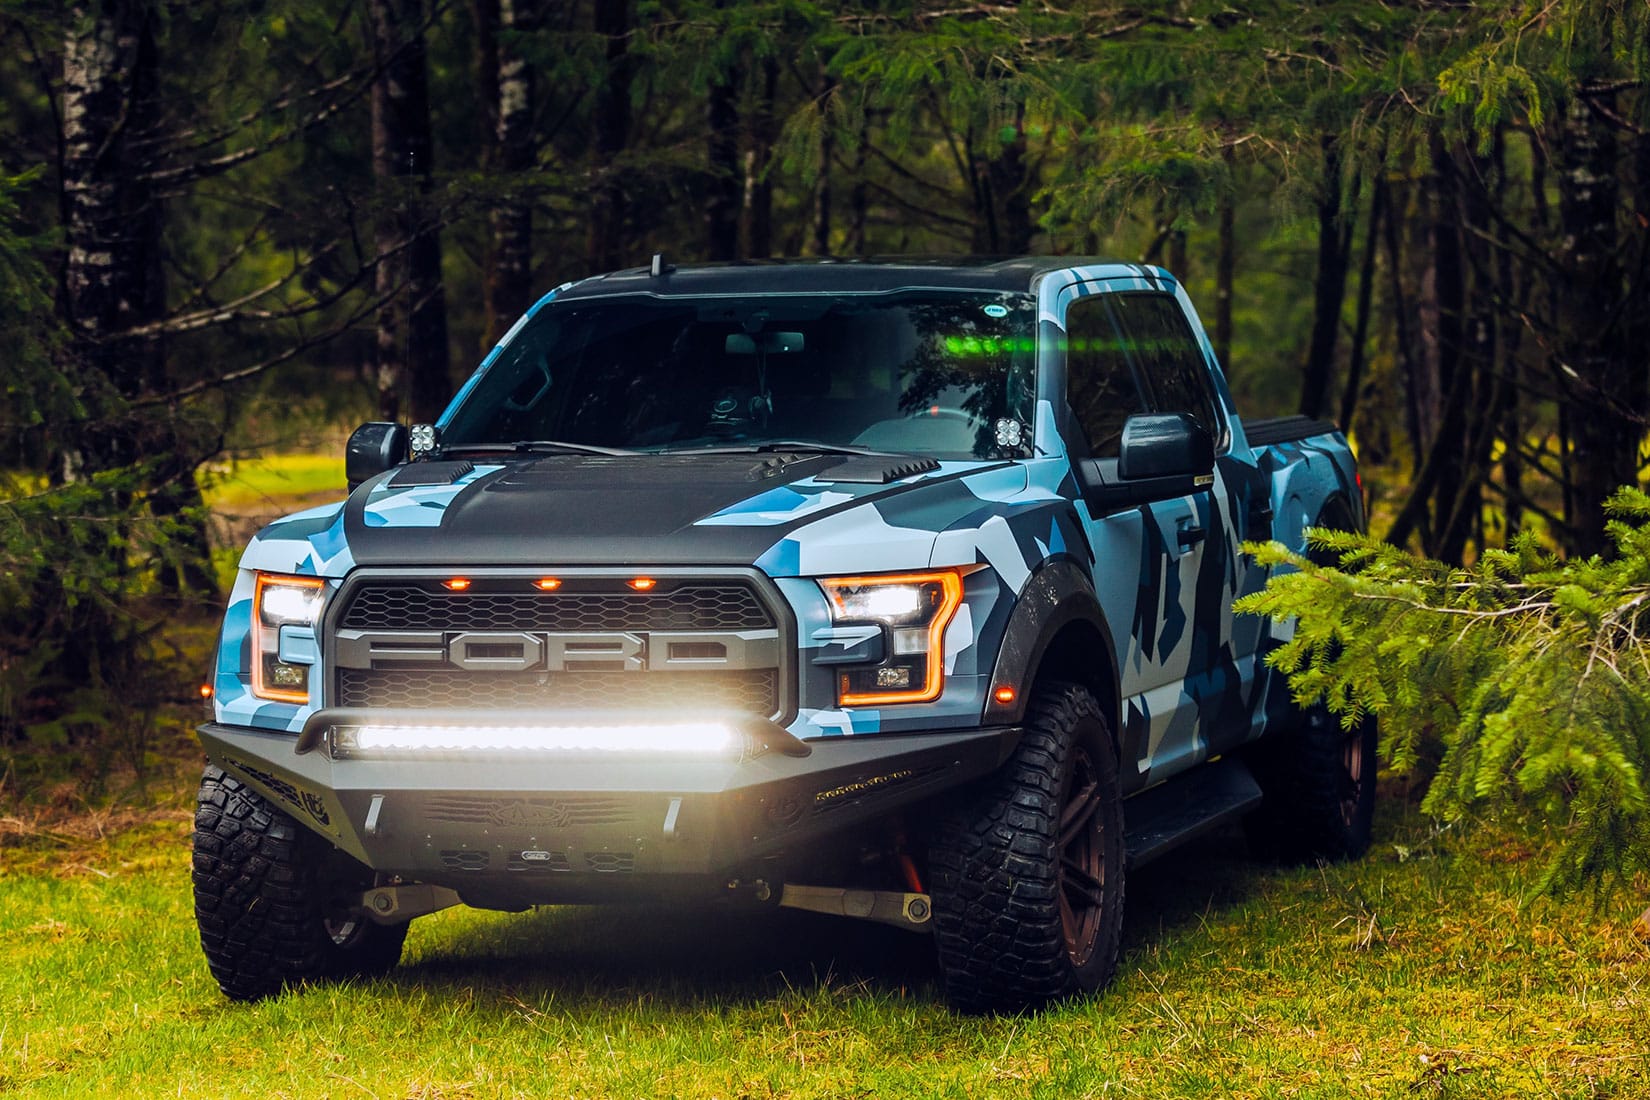 Front view of a blue camo Ford truck with LED light bar mounted below its grille and headlights.